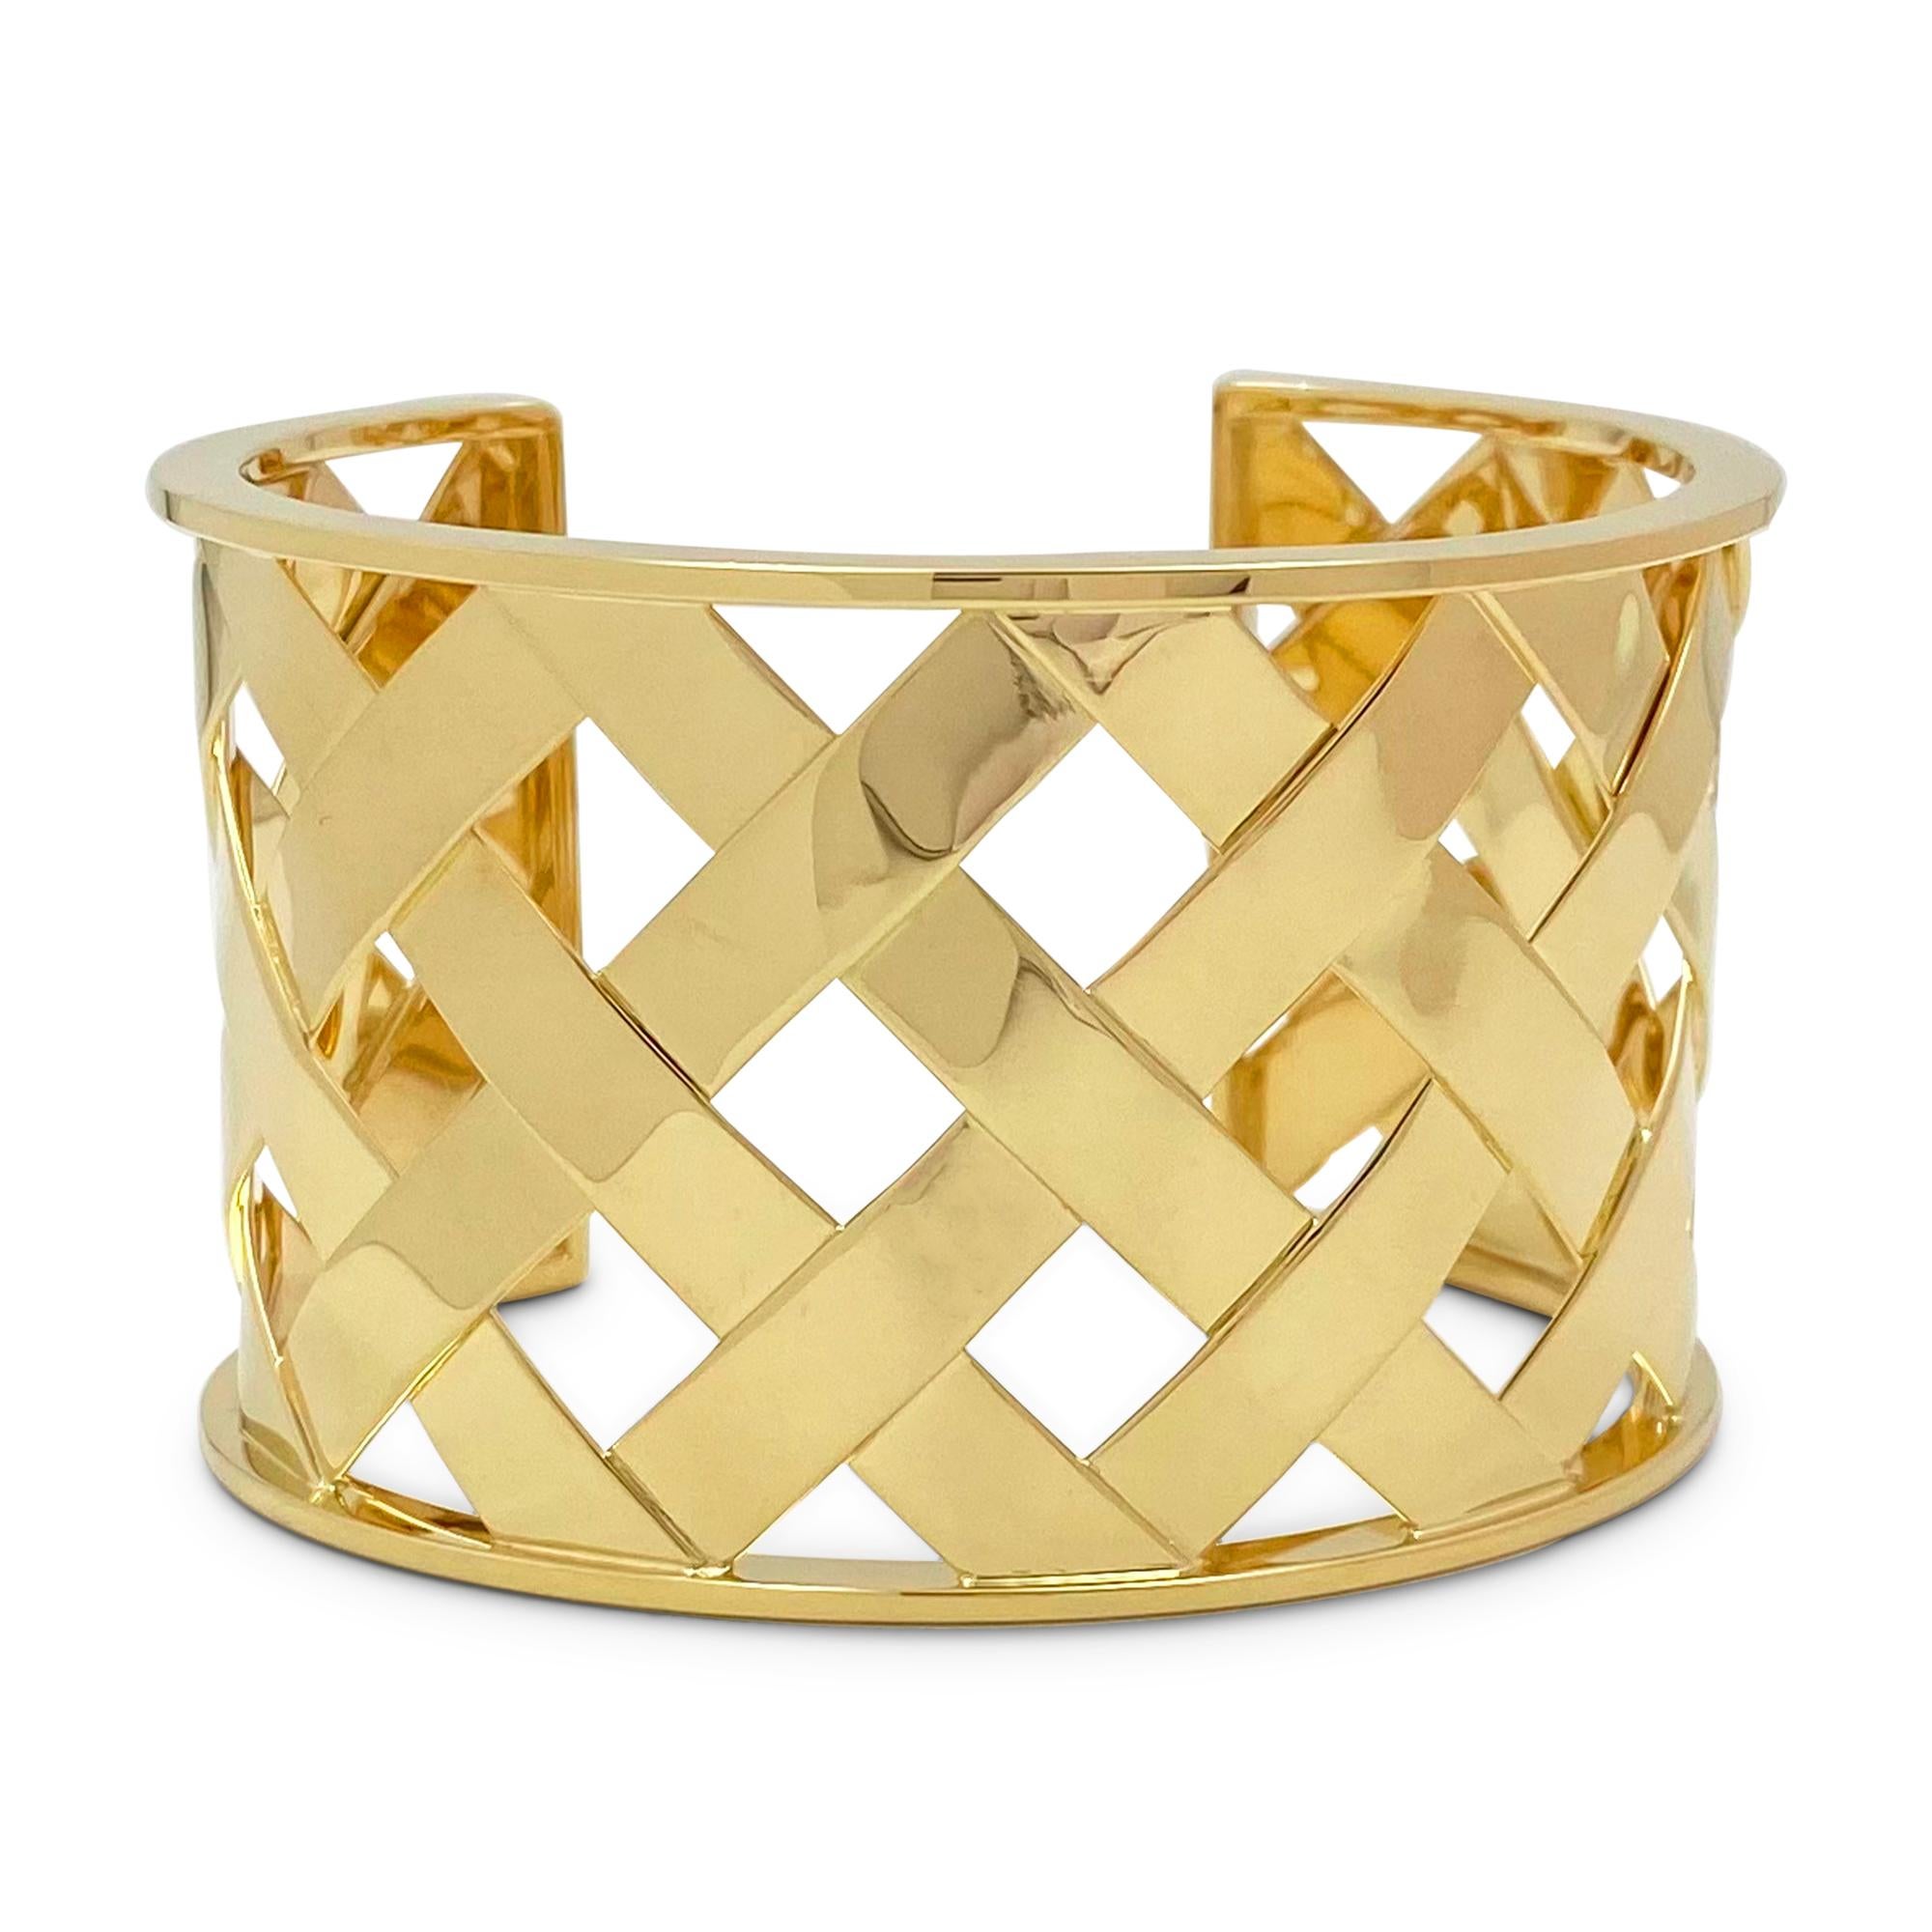 Authentic Verdura 'Criss Cross' cuff bangle crafted in 18 karat yellow gold. The open cuff design will fit up to a 5 1/2-inch wrist. Signed Verdura, 750 with serial number. Bracelet is presented with the original box, no papers. CIRCA 2000s.

Brand: